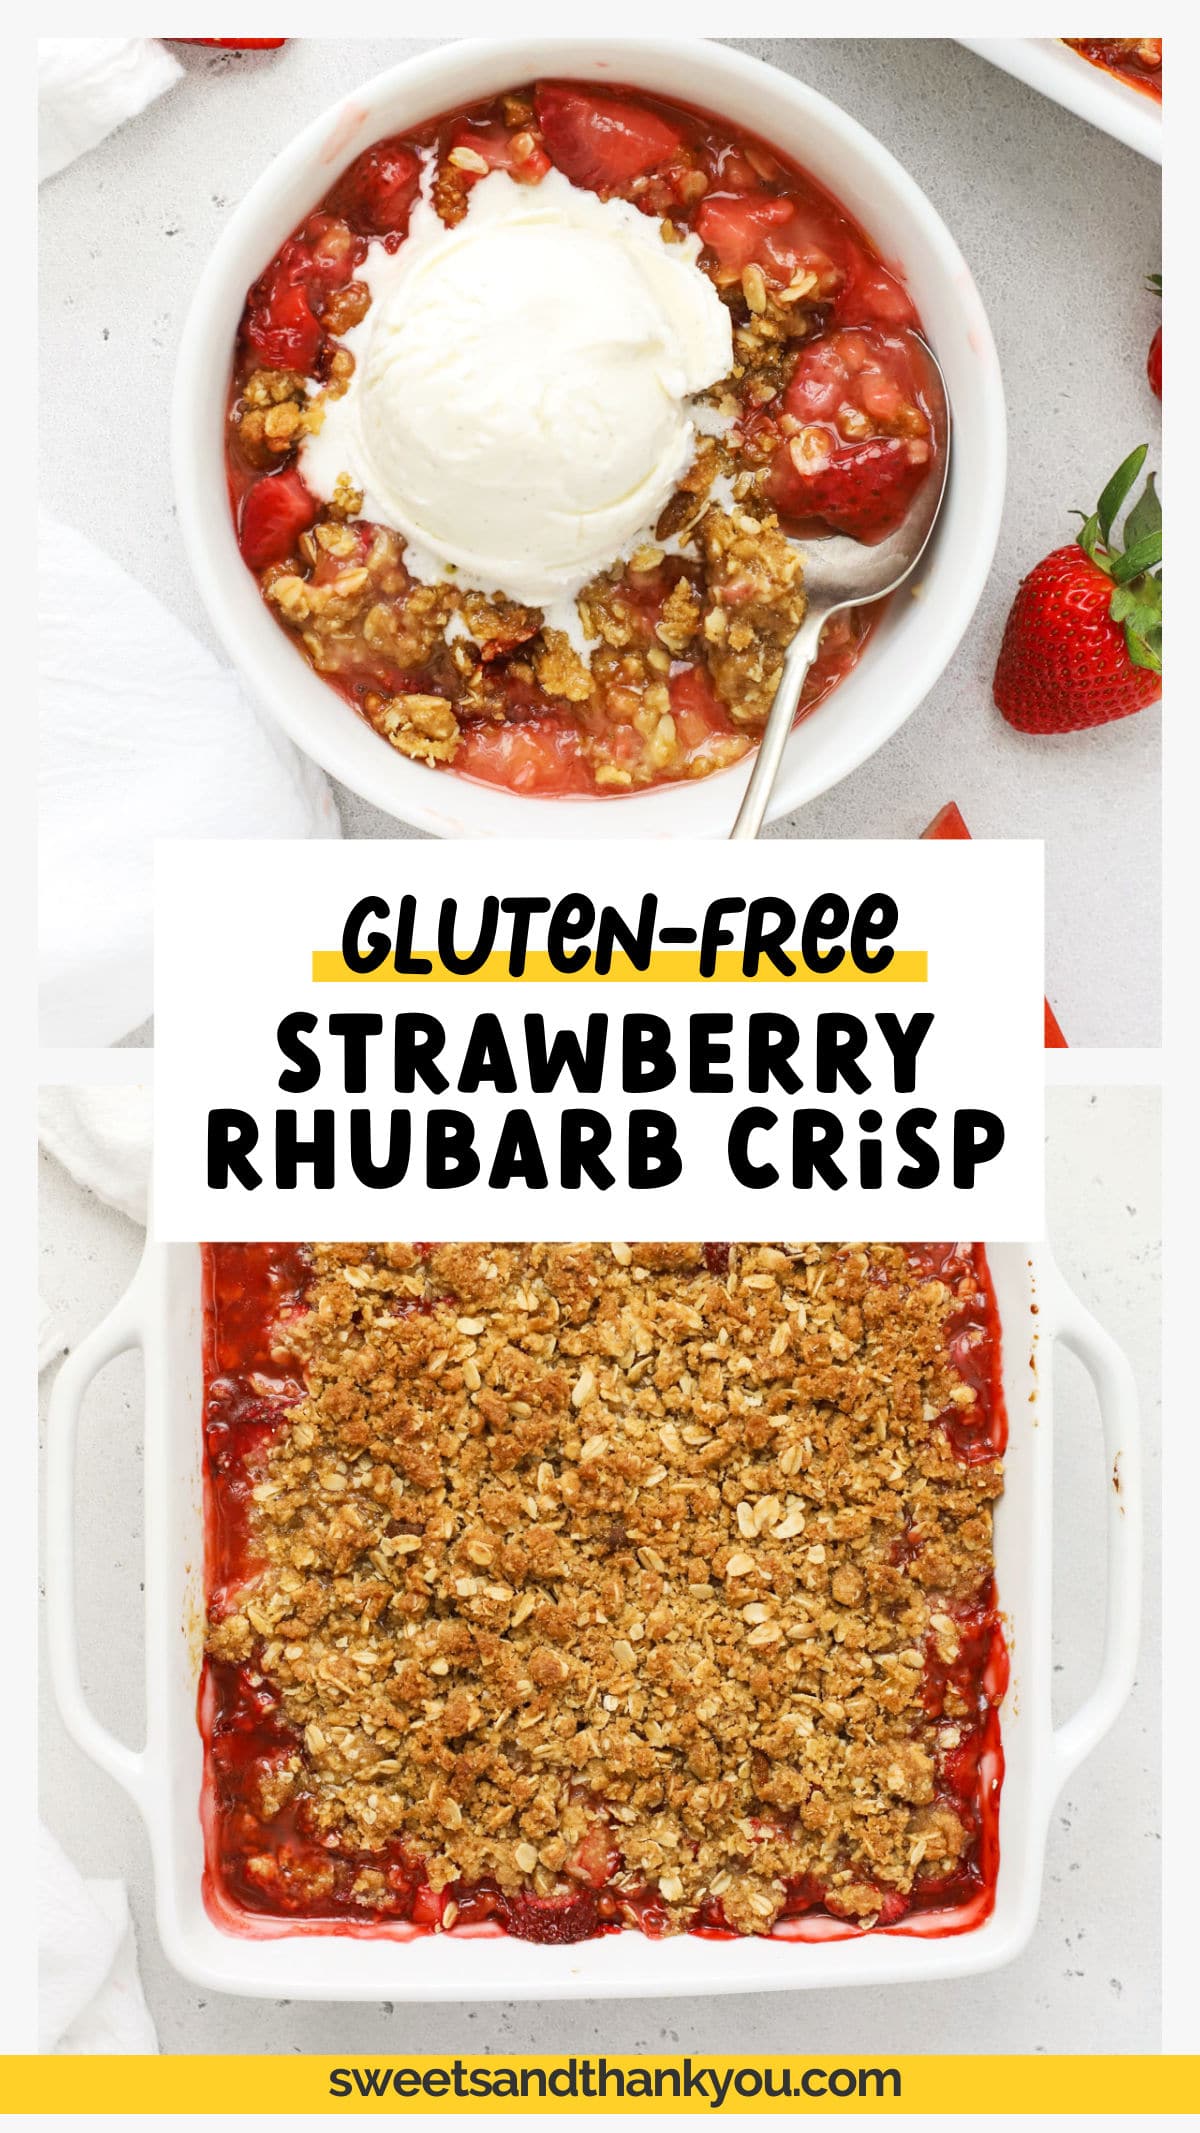 Our Gluten-Free Strawberry Rhubarb Crisp is the perfect summer dessert! This gluten-free strawberry rhubarb crumble is made in just ONE bowl with a handful of simple ingredients. The crispy oatmeal crumble topping, the tartness of the rhubarb & sweetness of the strawberries strike the perfect balance of flavors in this summer fruit crisp, making it the perfect sweet ending for a summer barbecue or cookout or a great Memorial Day or 4th of July dessert recipe. 